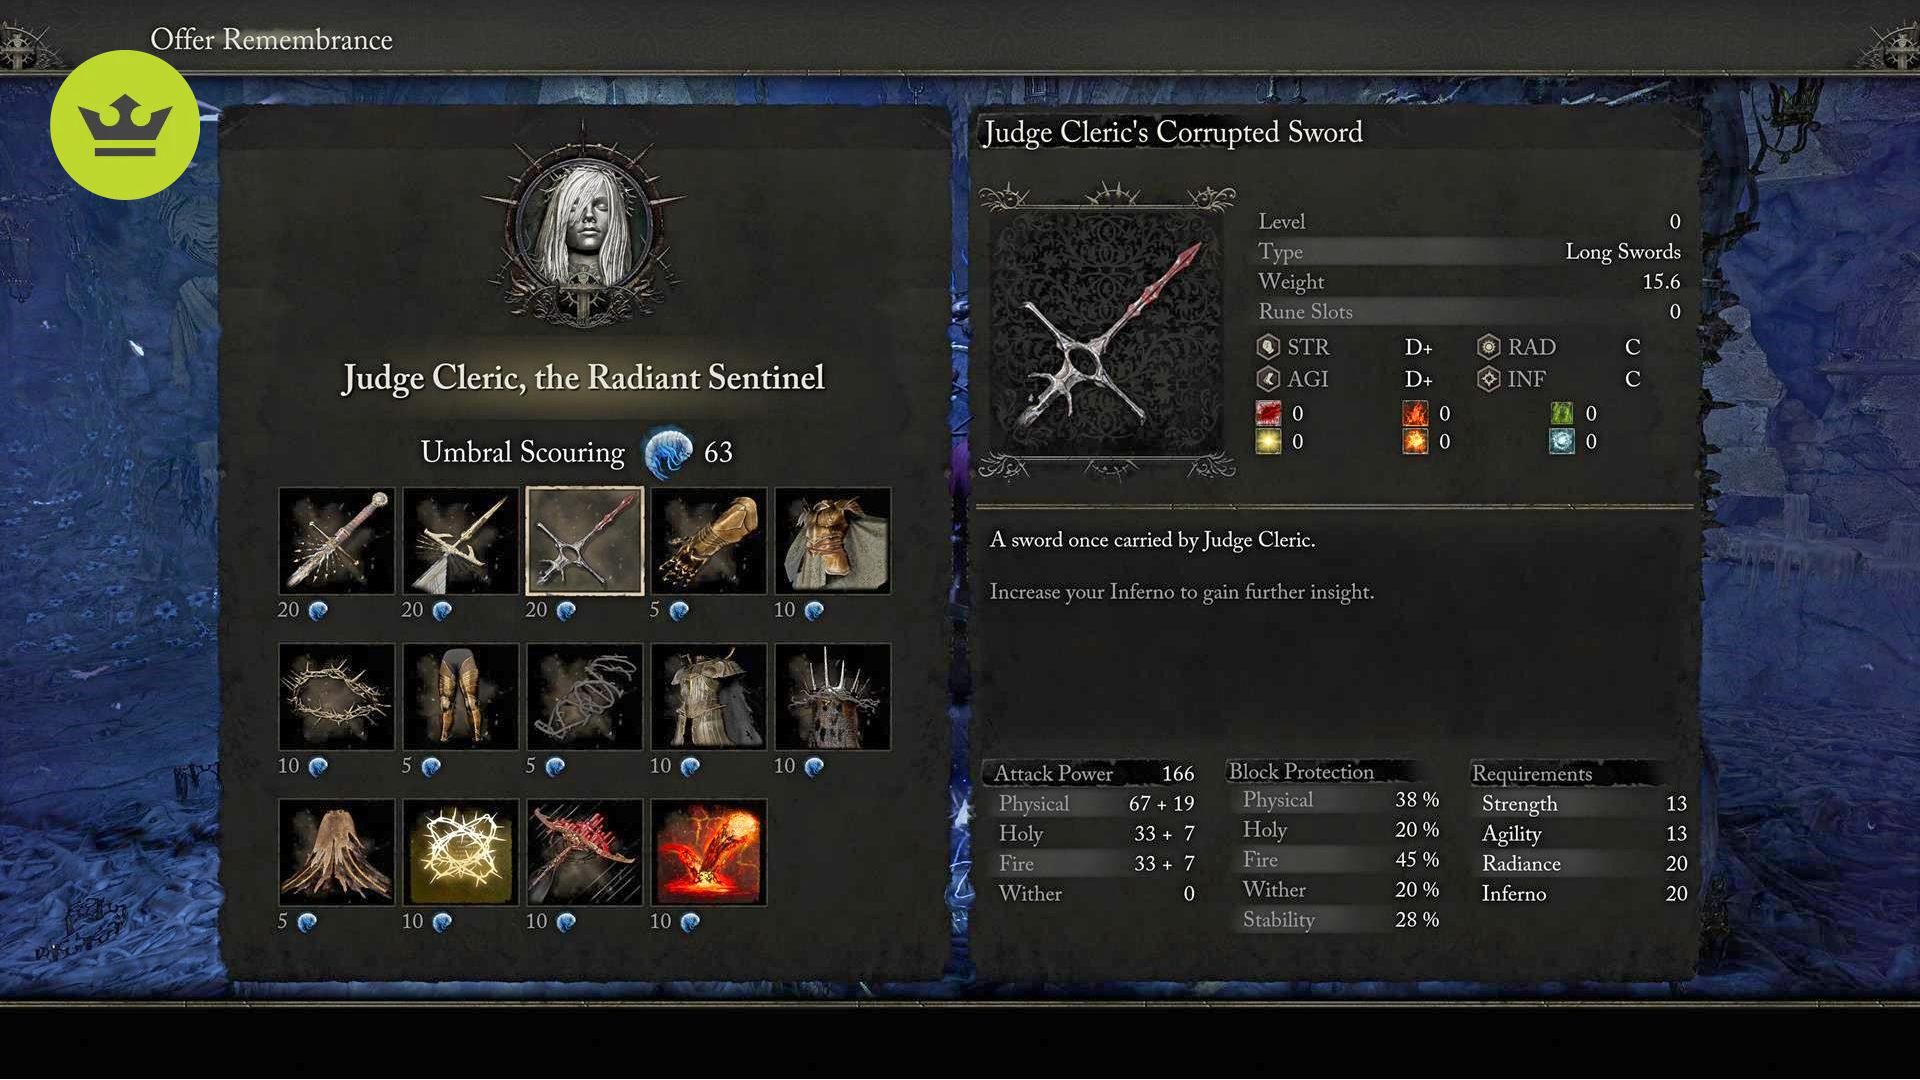 Lords of the Fallen Best Weapons: Judge Cleric's Corrupted Sword can be seen